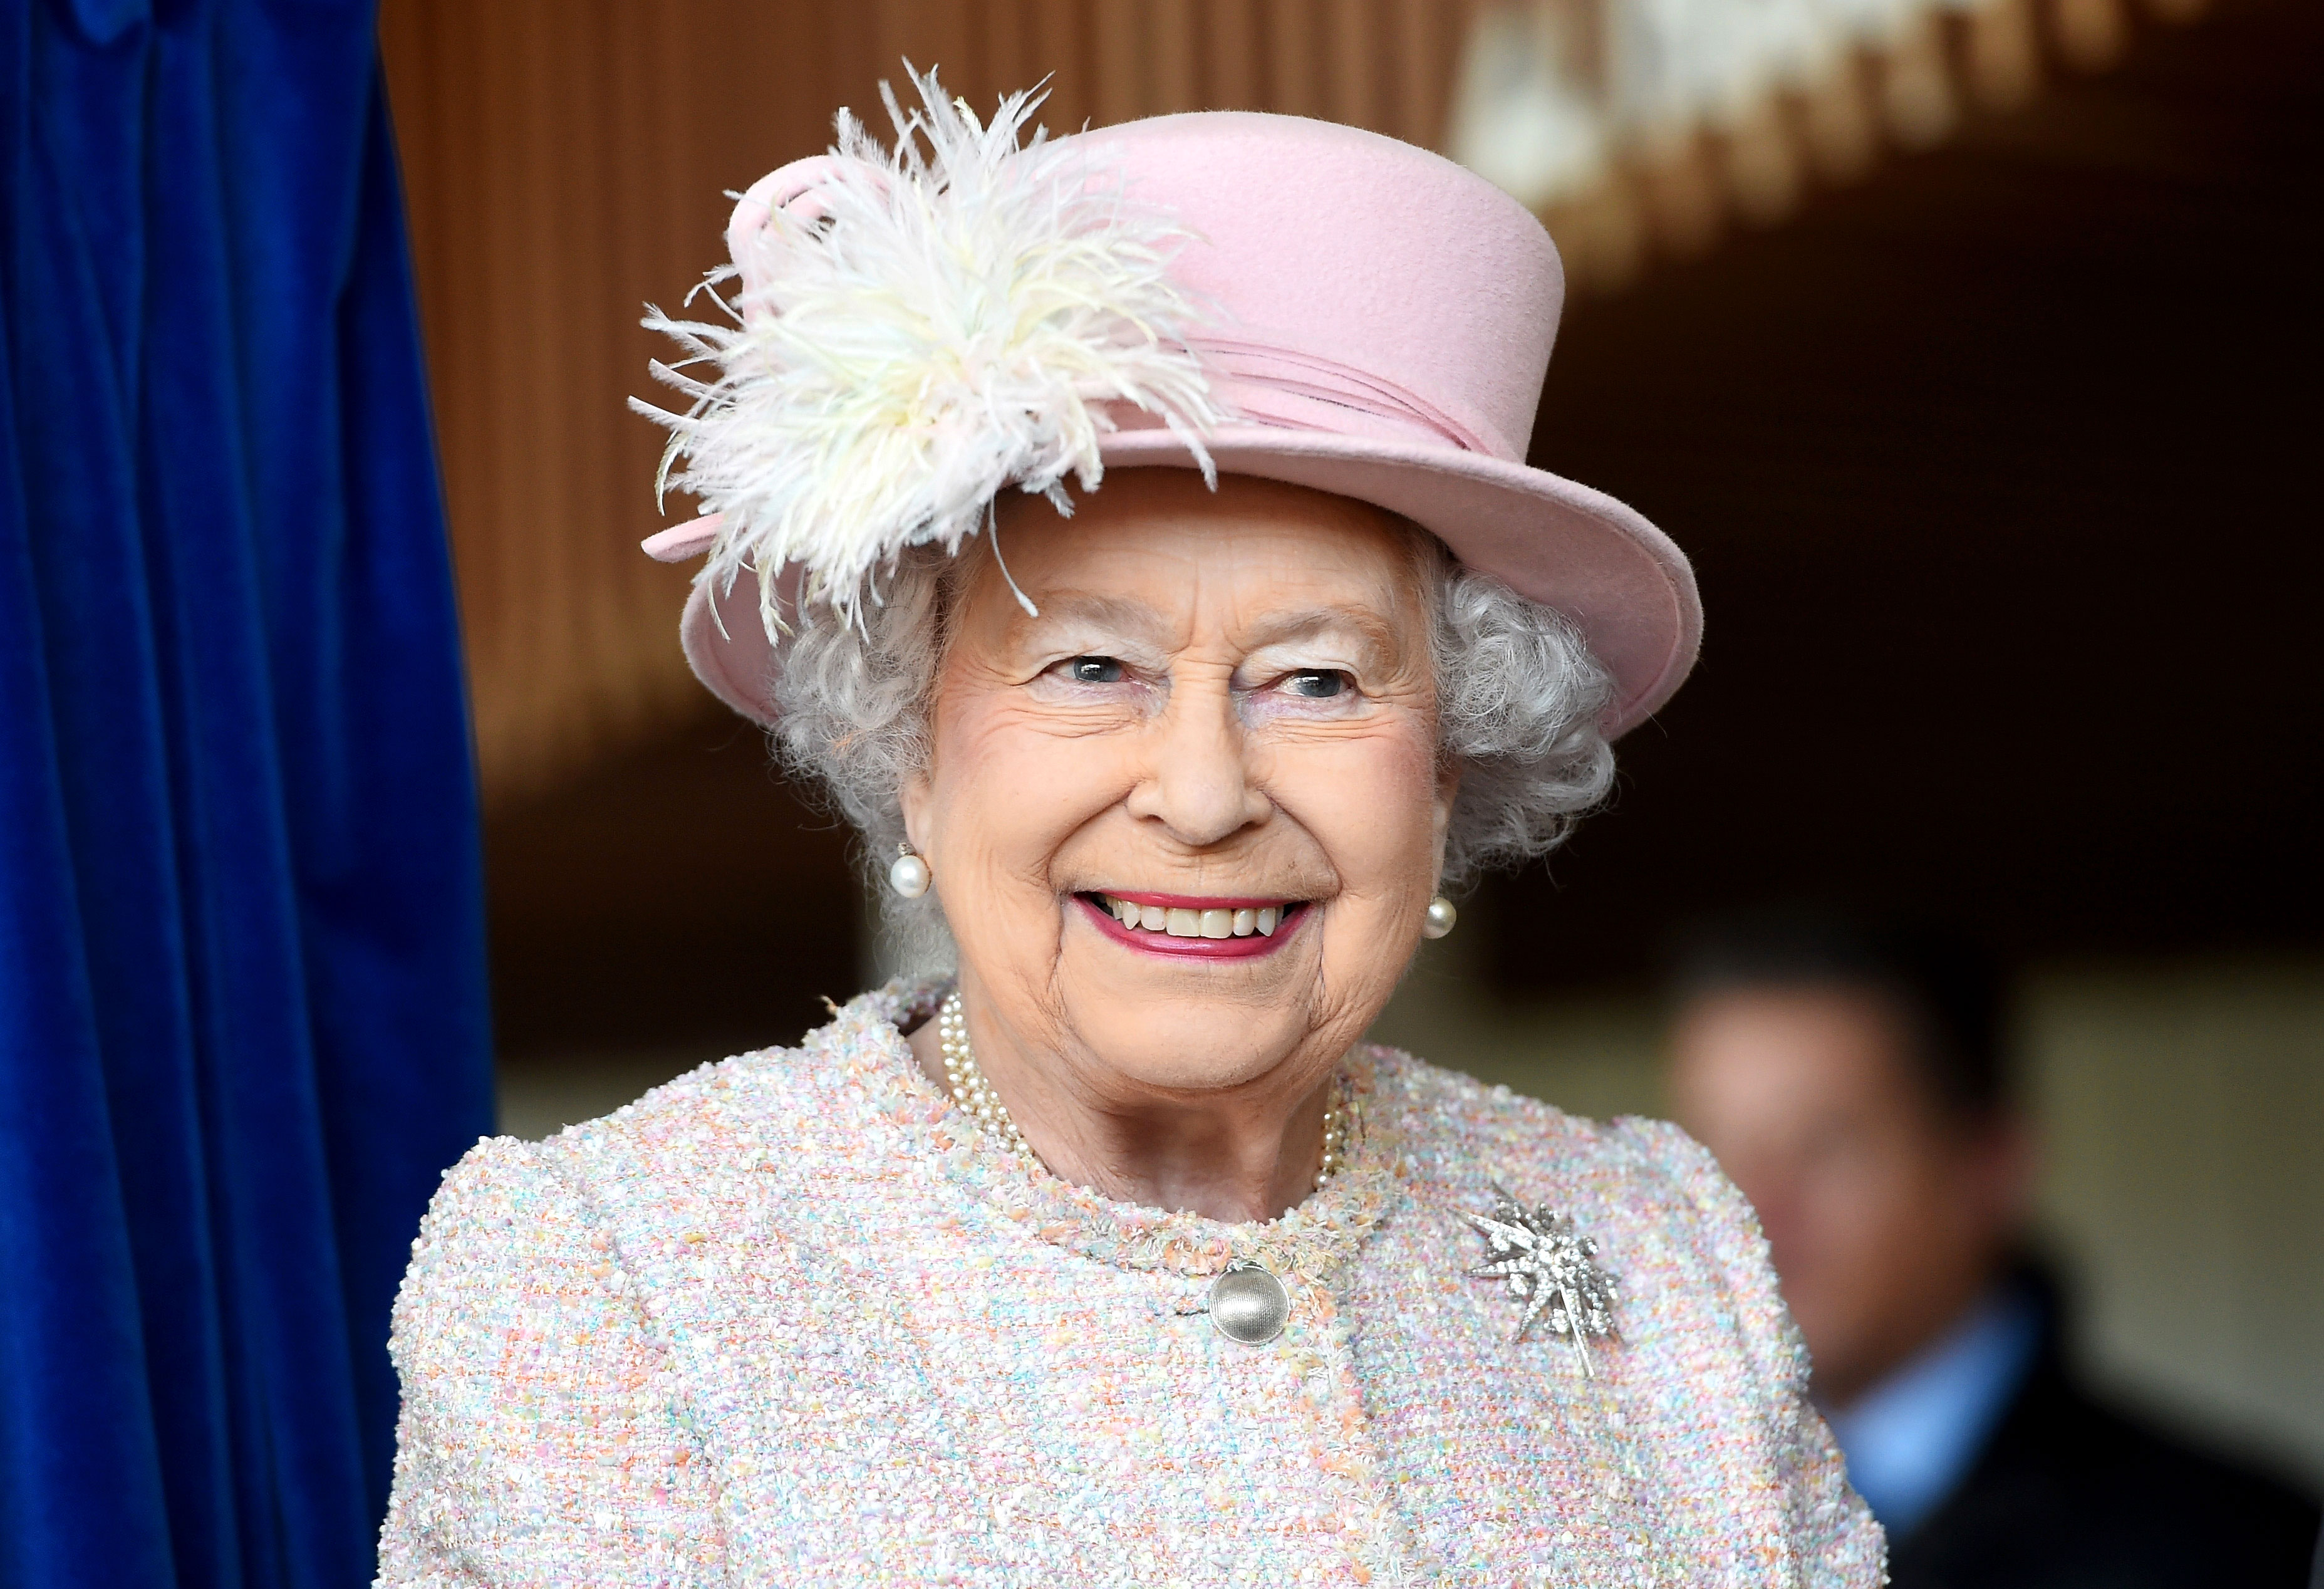 Watch Queen Elizabeth's funeral procession to Westminster Abbey